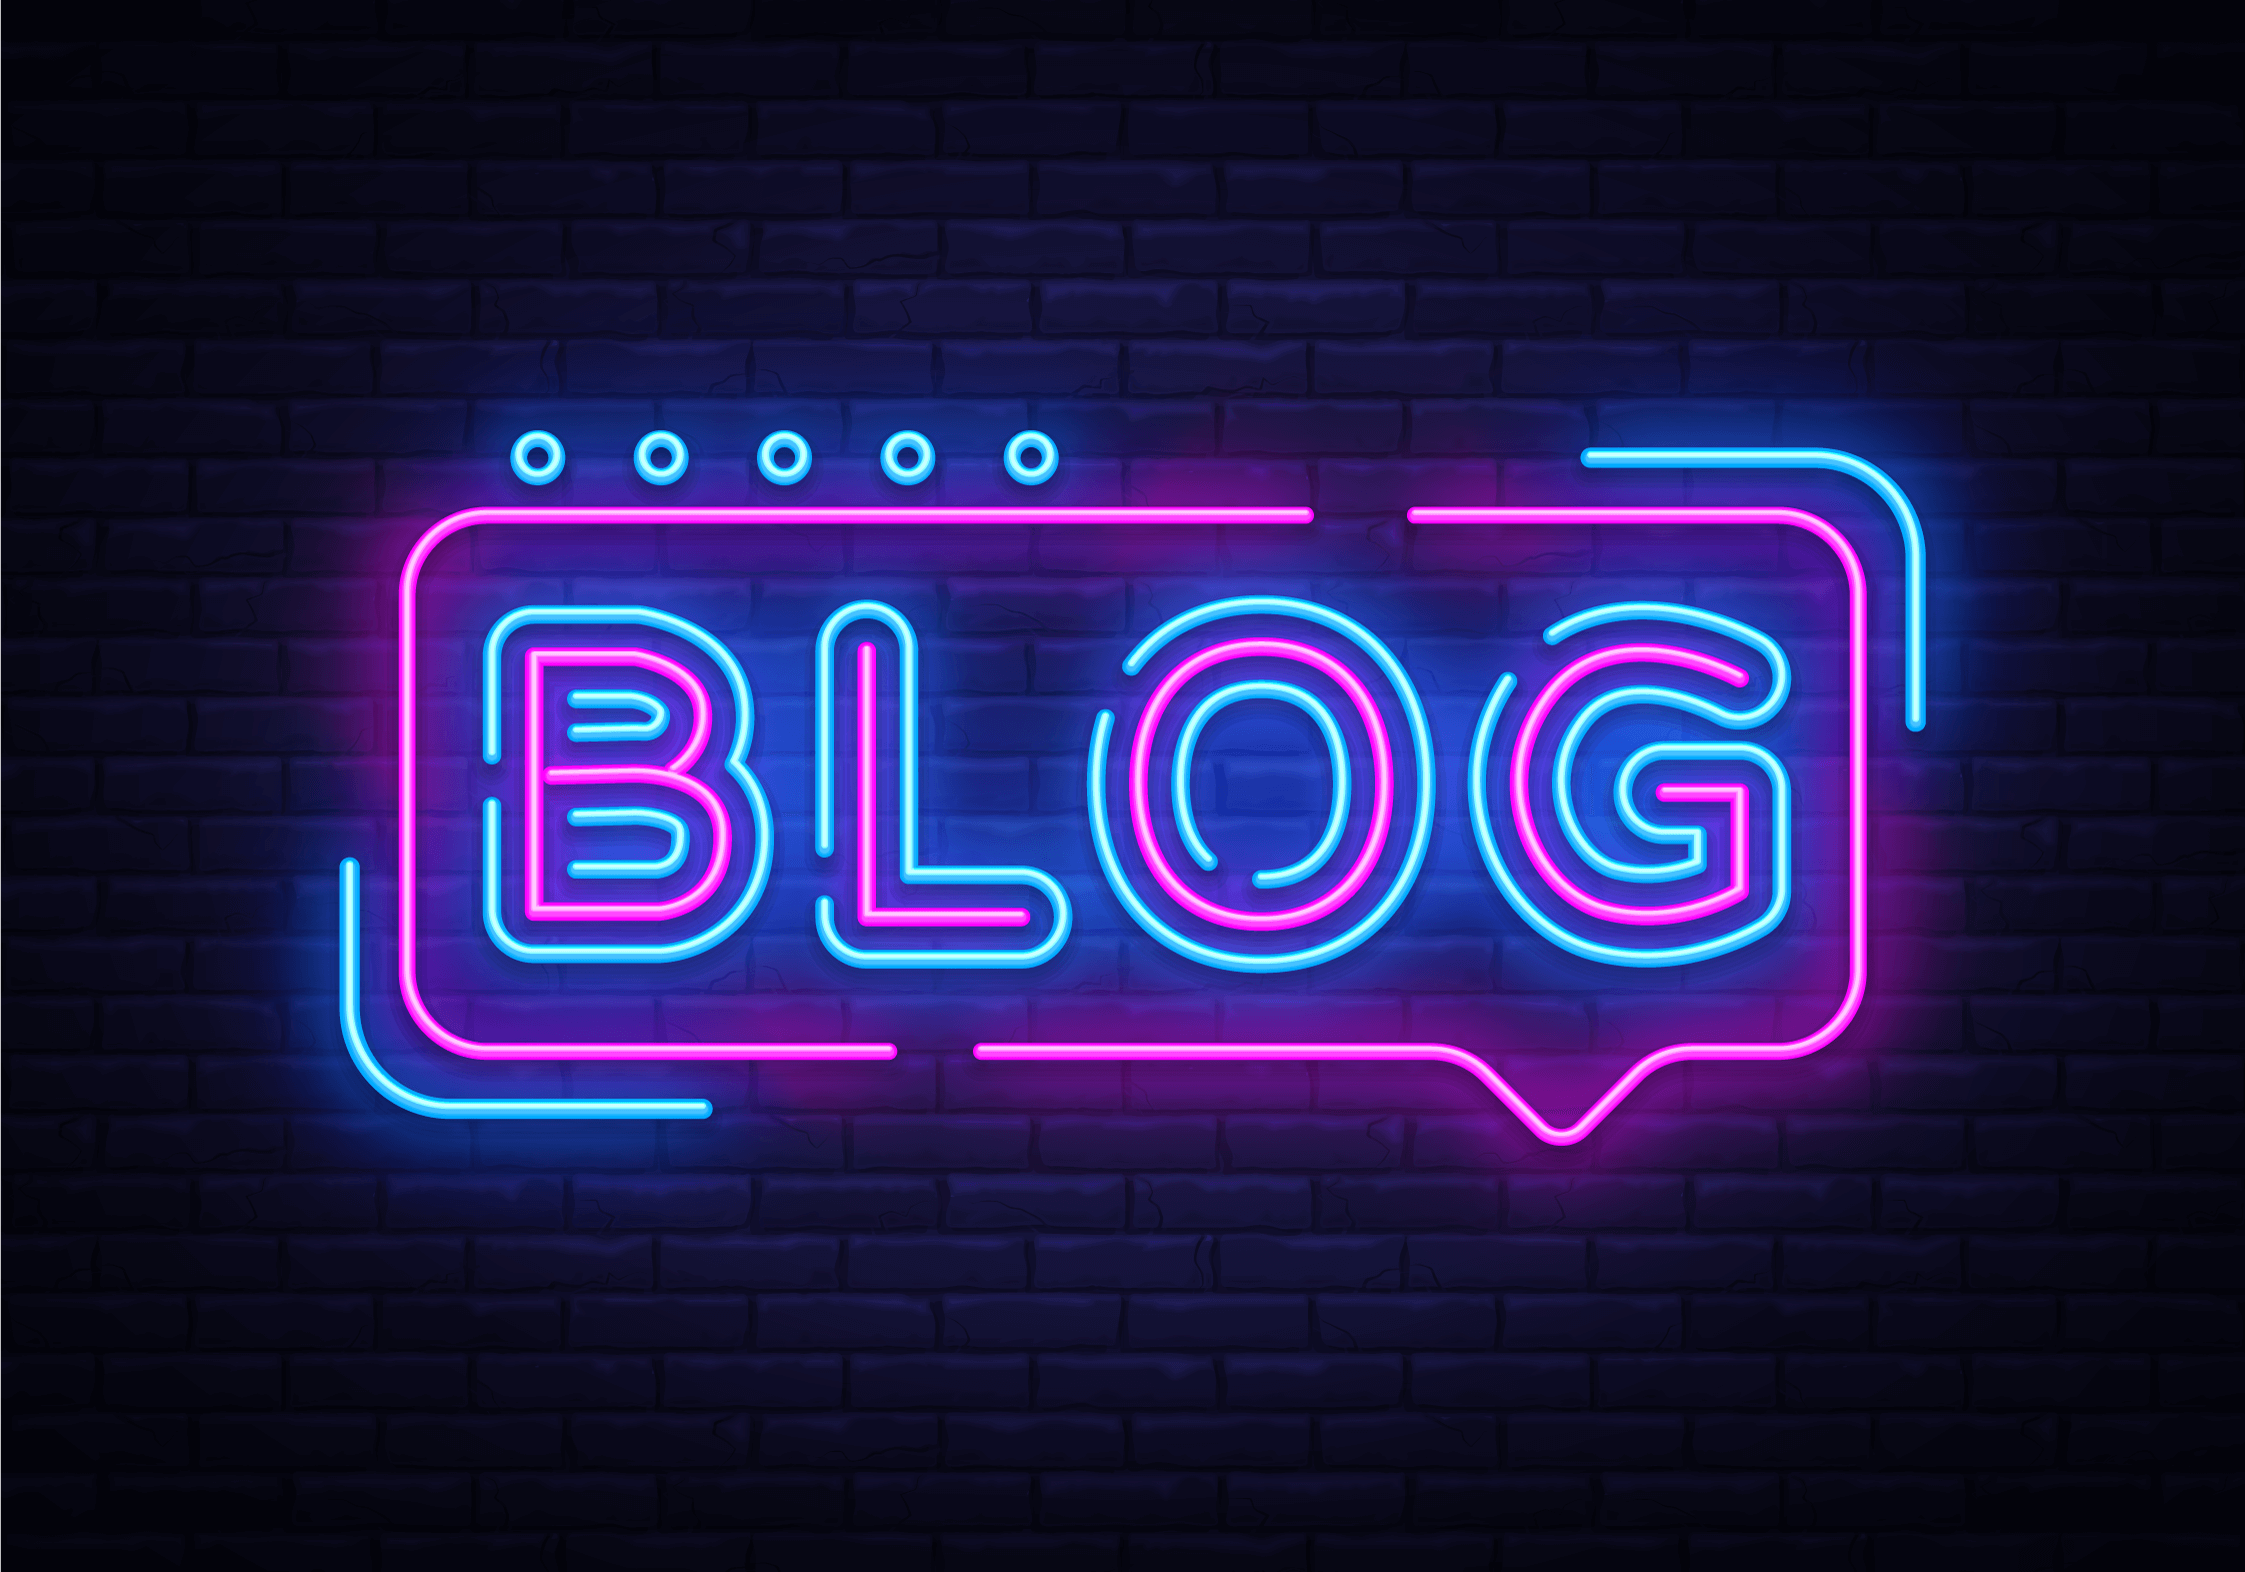 What do you think of my new blog logo and background?